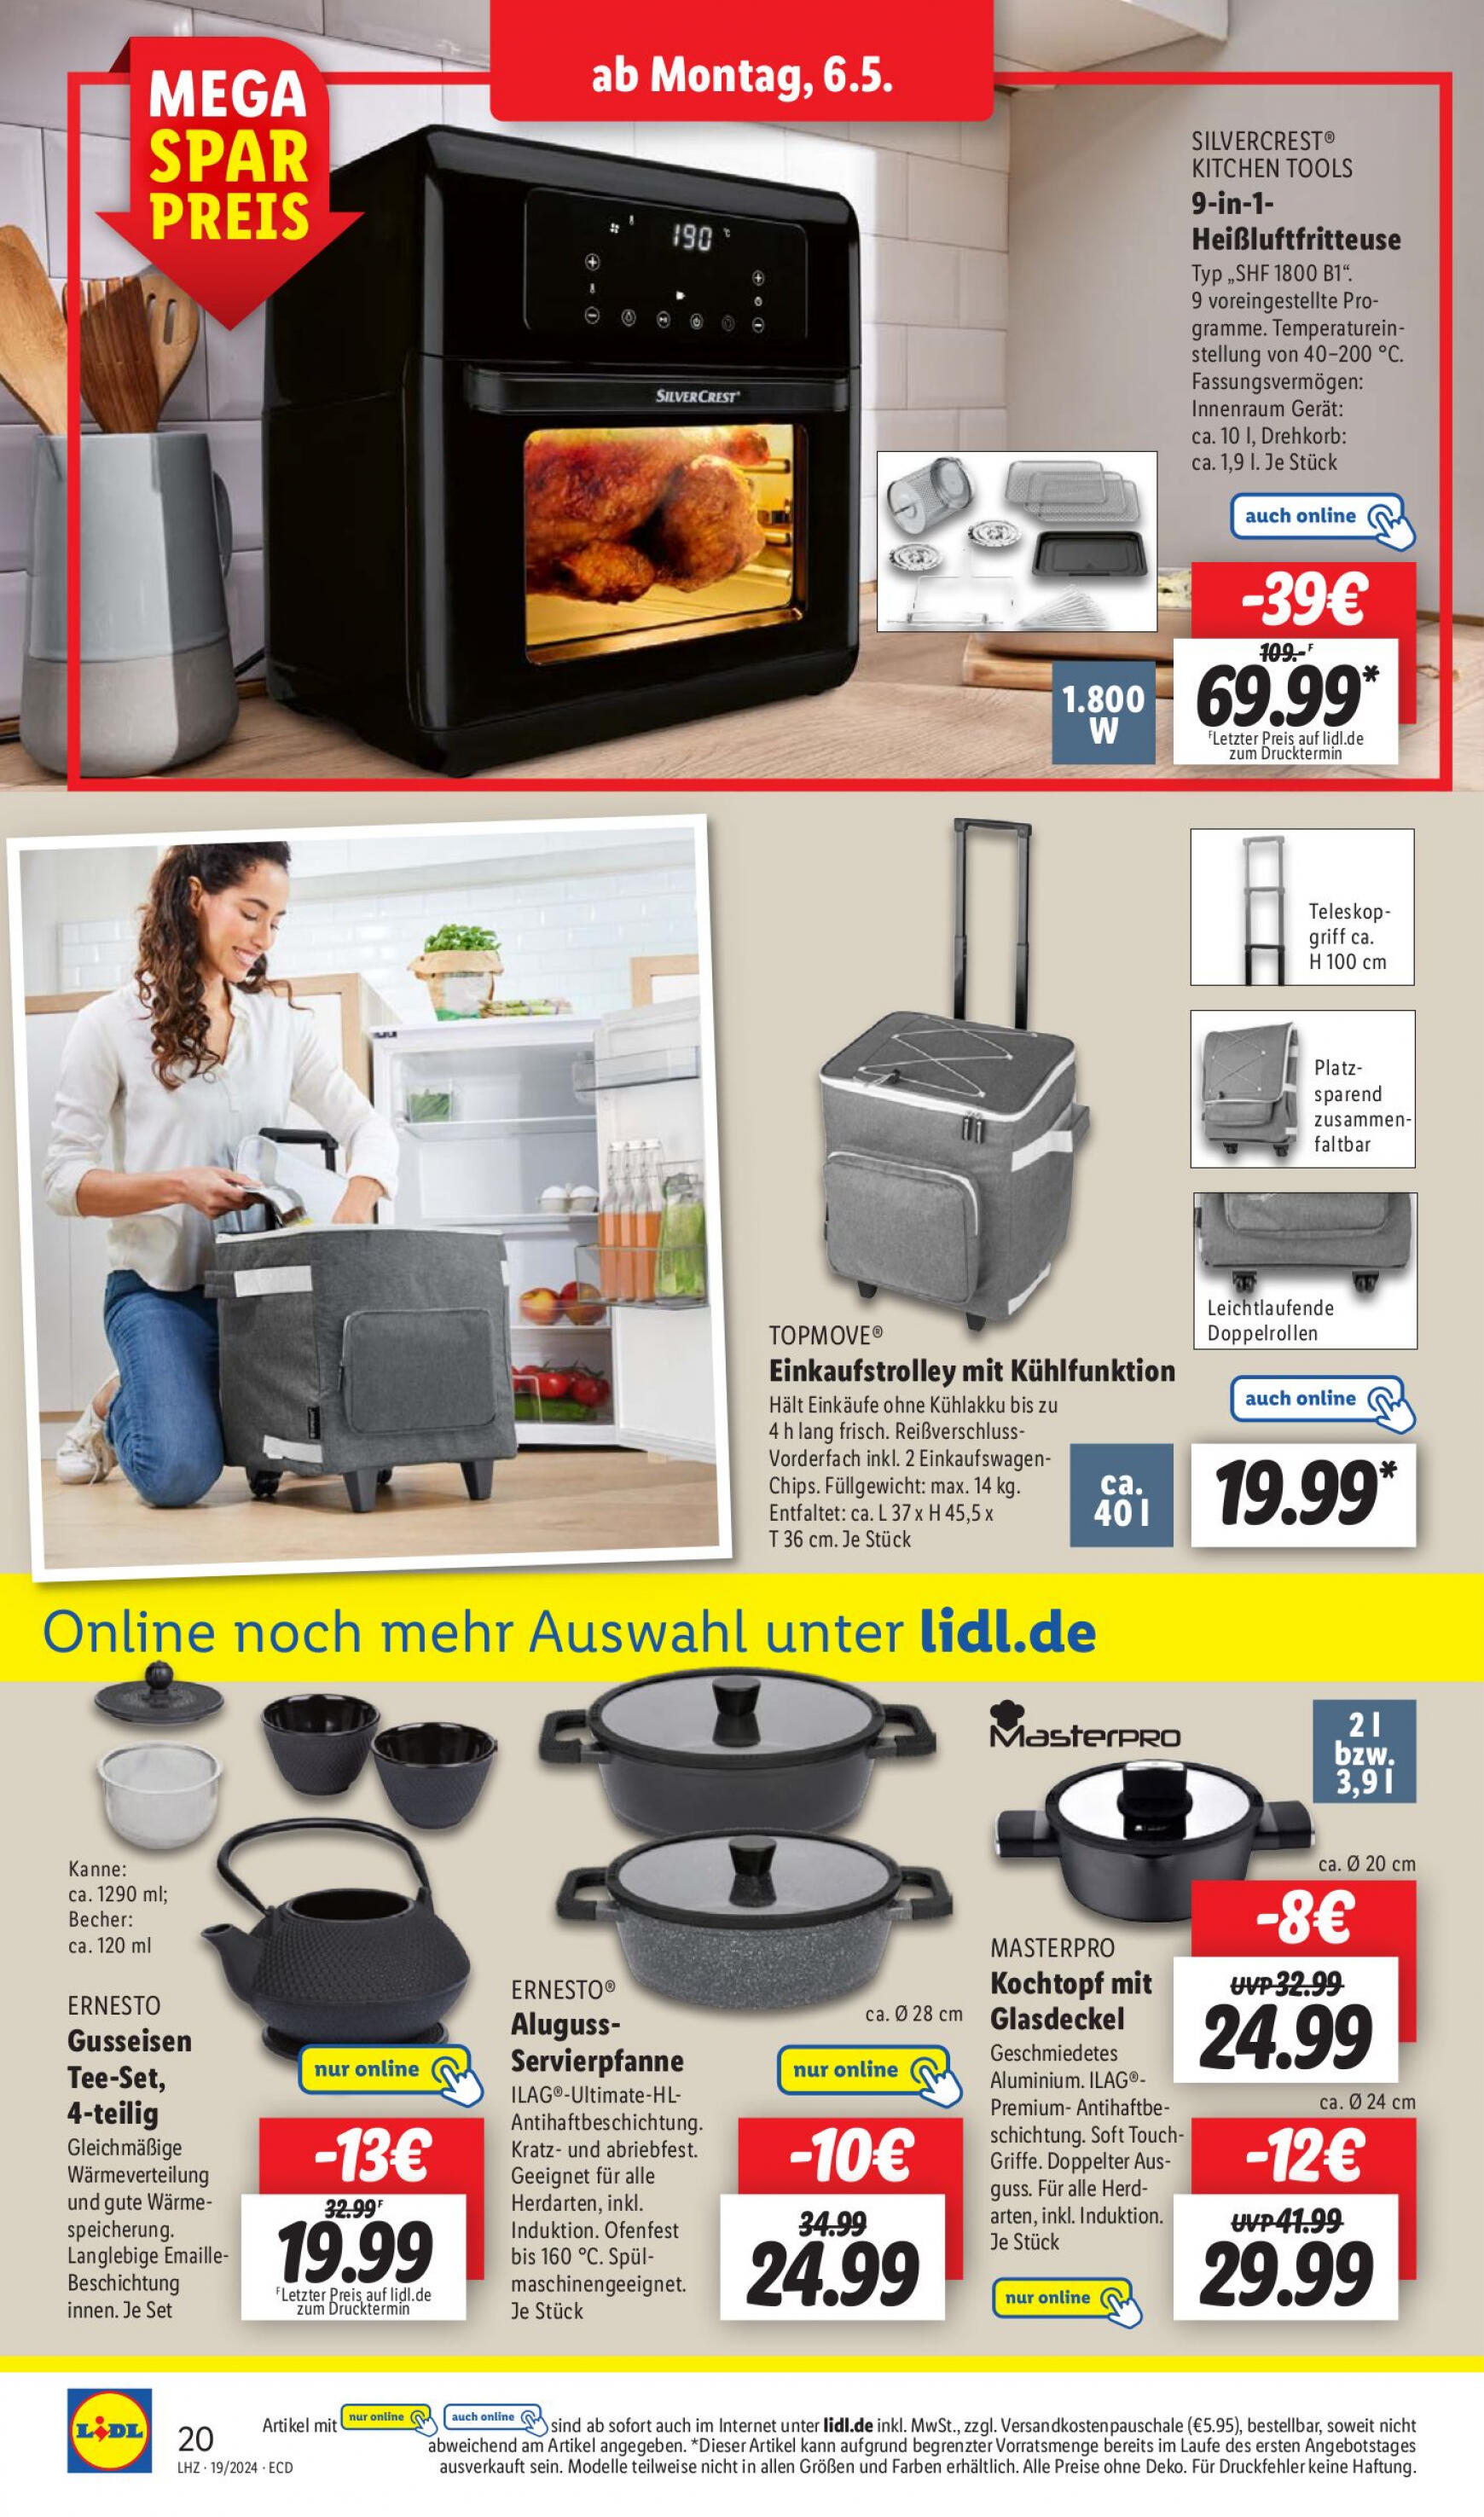 lidl - Flyer Lidl aktuell 06.05. - 11.05. - page: 22